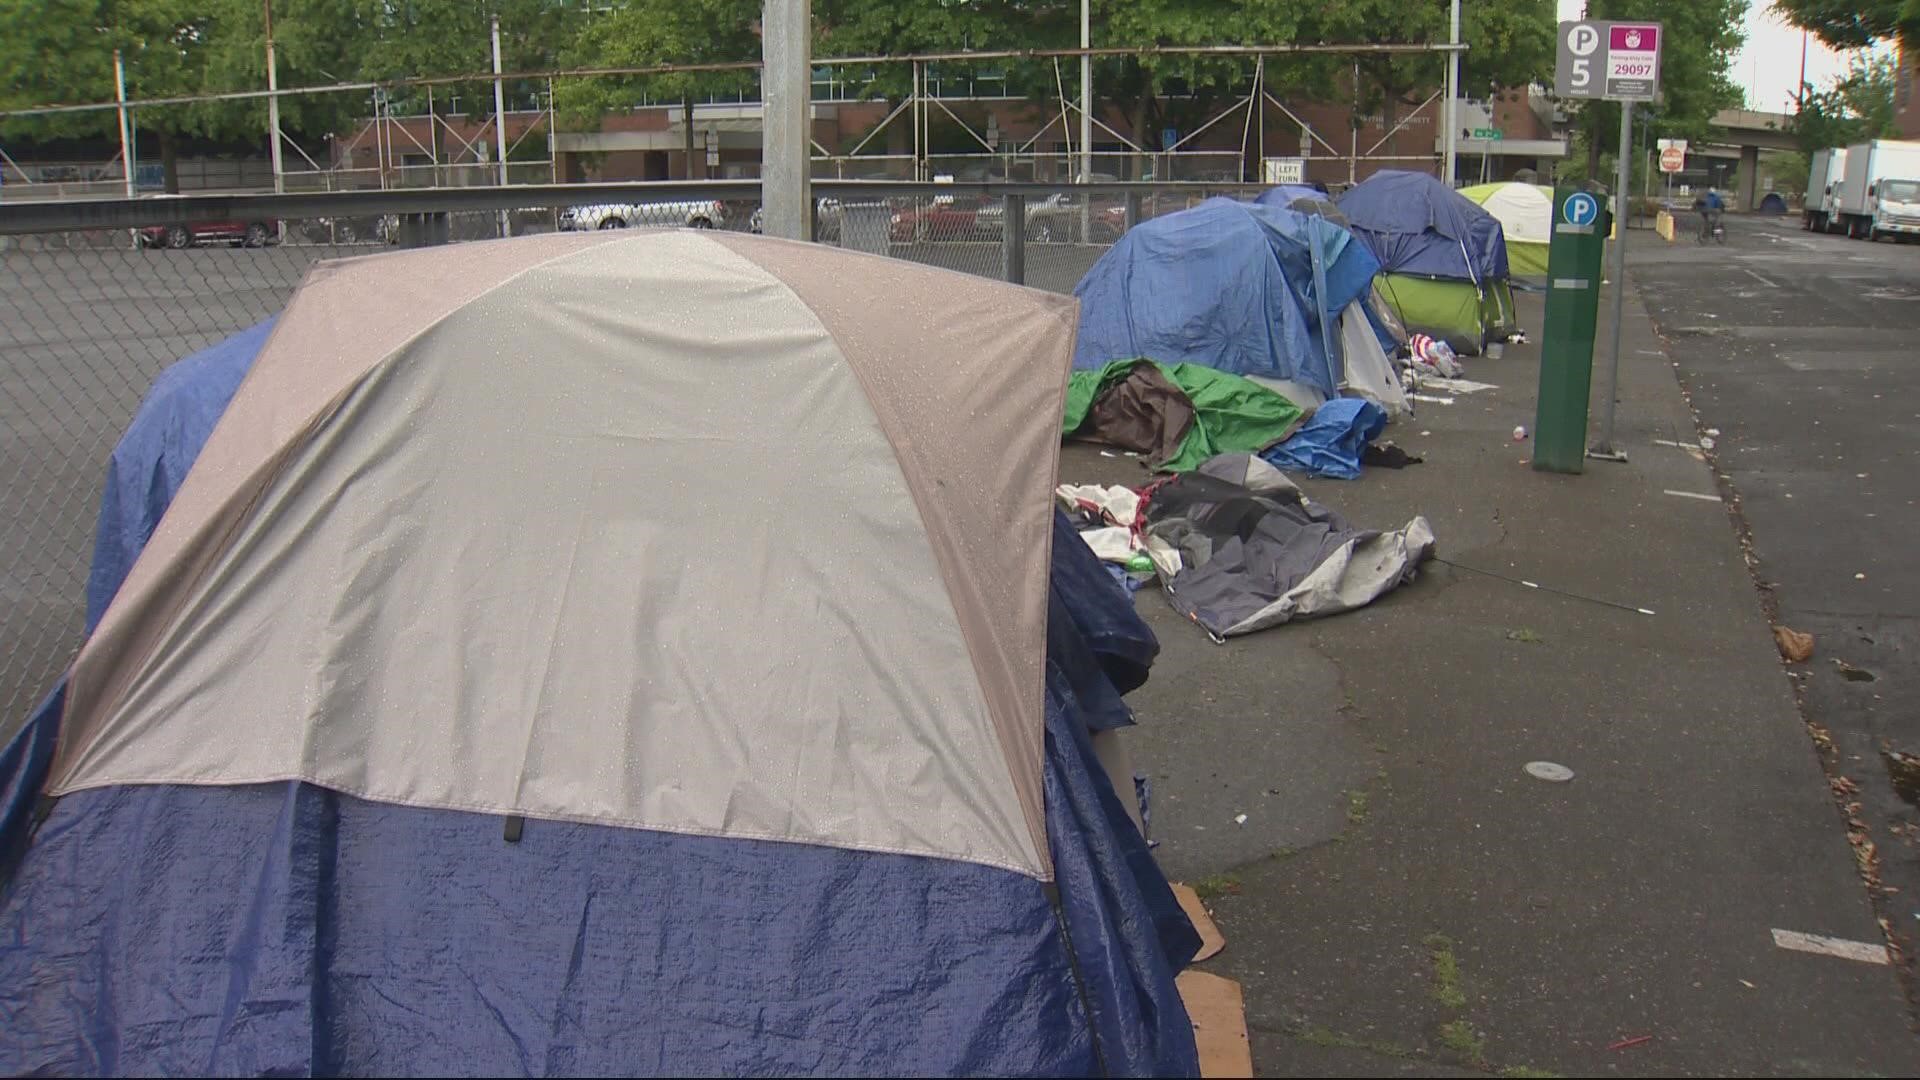 The initiative comes from the political action group People For Portland. It aims to put pressure on elected officials to solve homelessness.